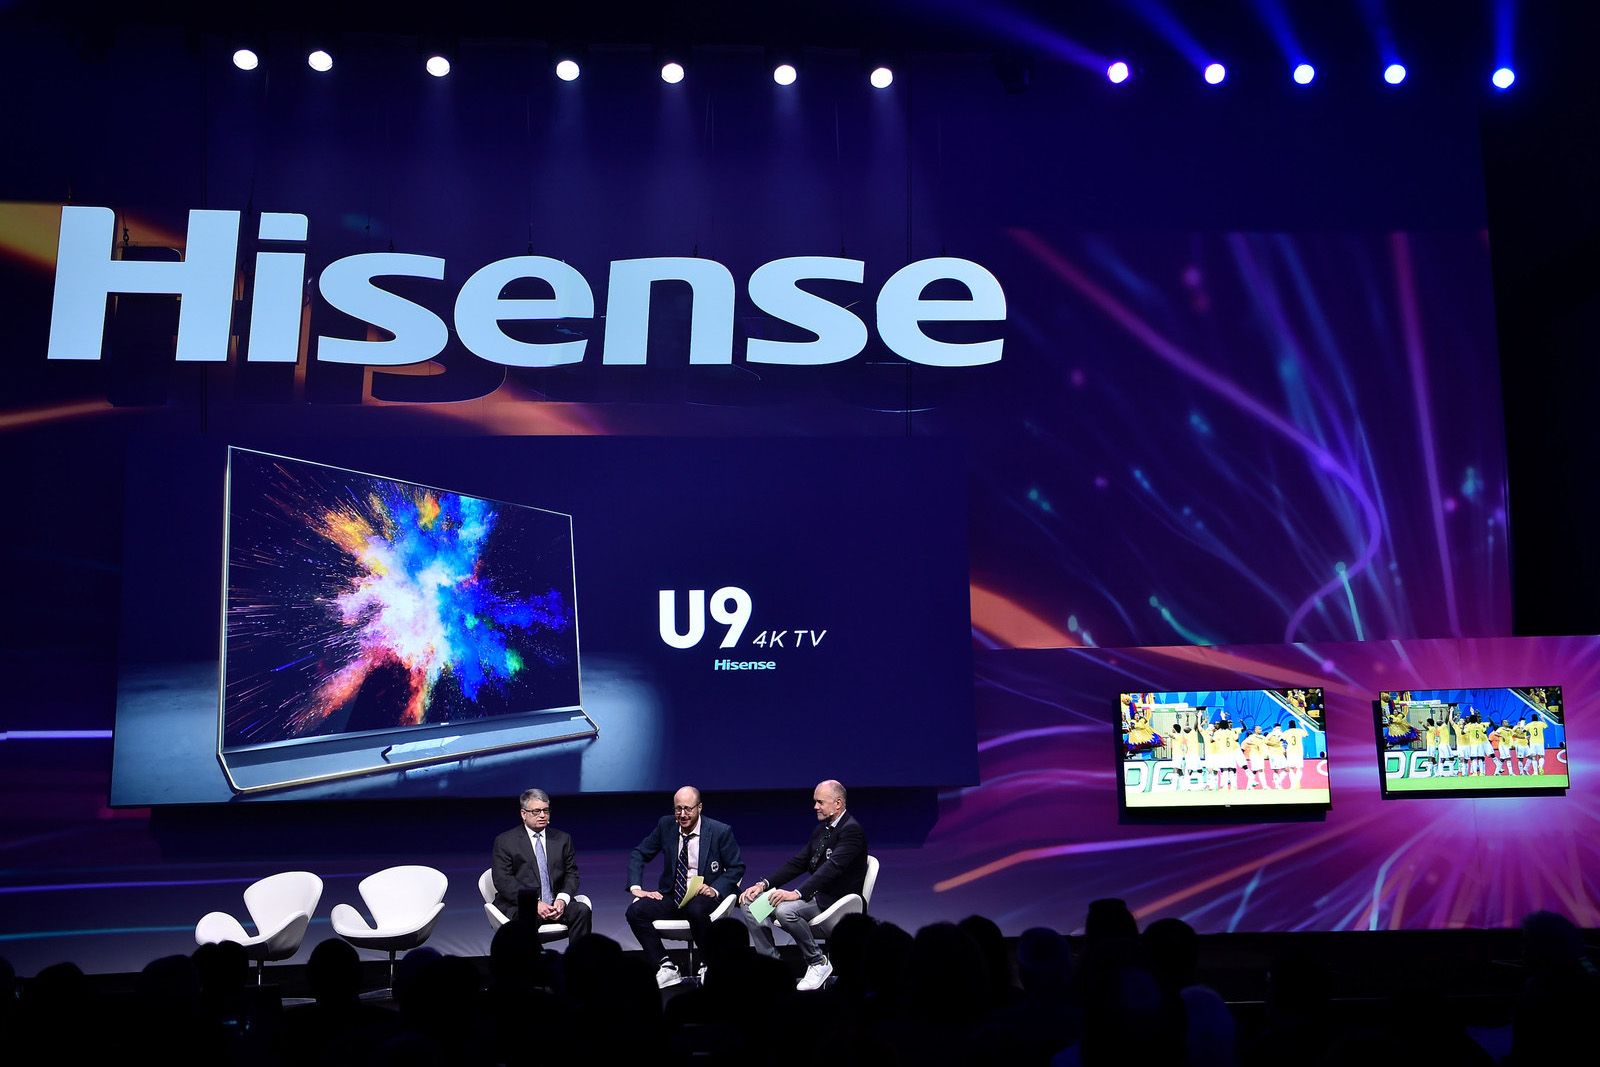 Hisense World Cup 2018 plans include special edition TVs and 4K HDR matches via app image 1